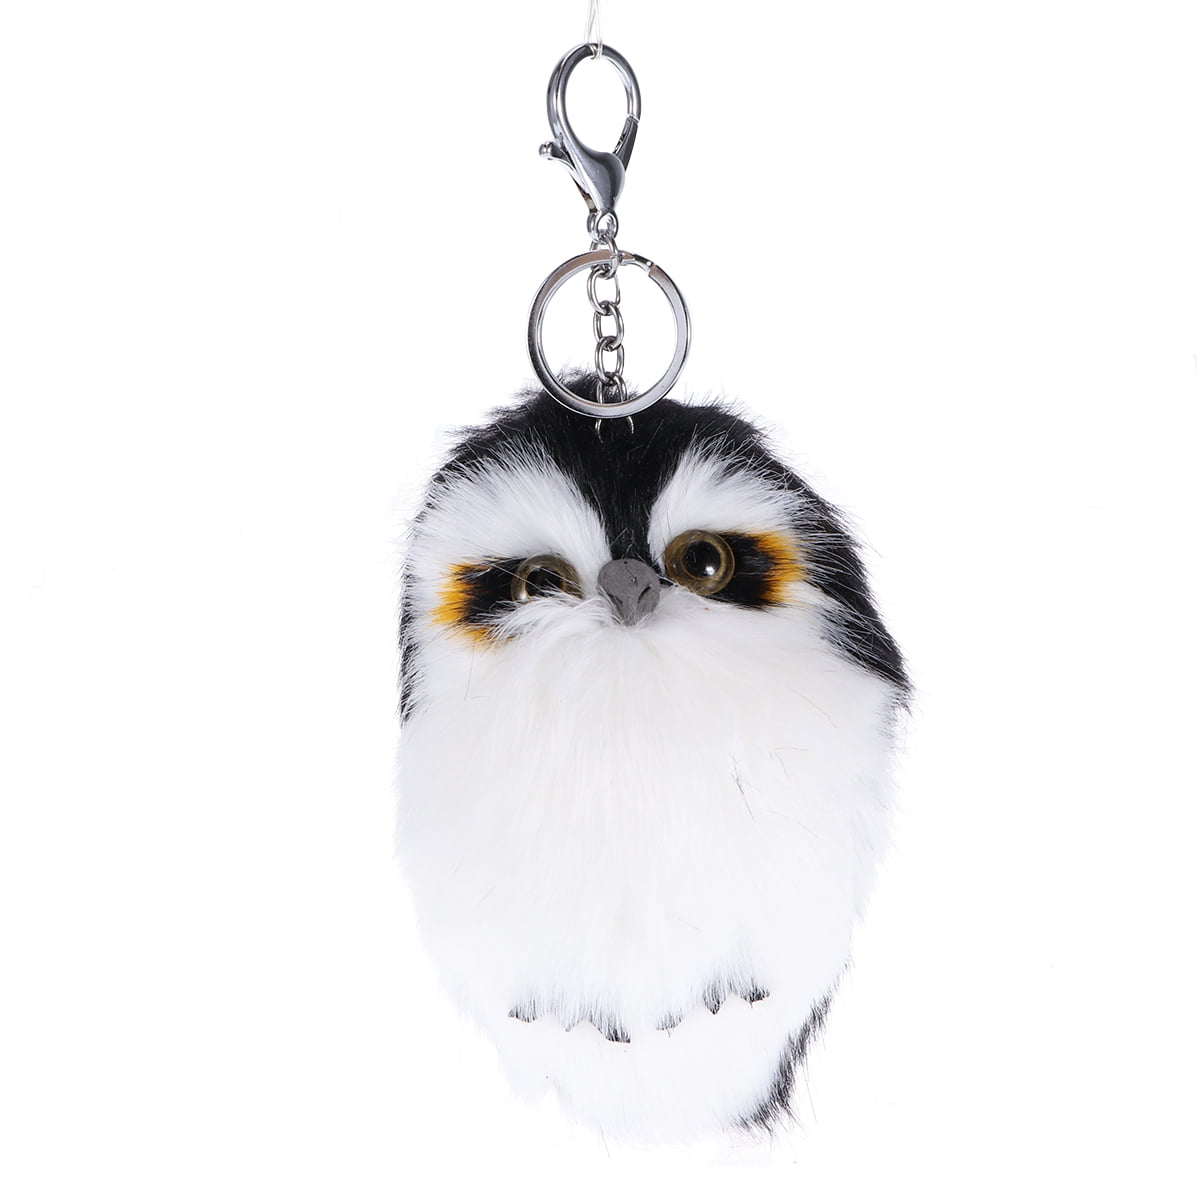 Details about   OWL HOOT TREE BARN GREEN KEY CHAIN CAMEO FINDER BELT CLIP PURSE KeyChain Rings 